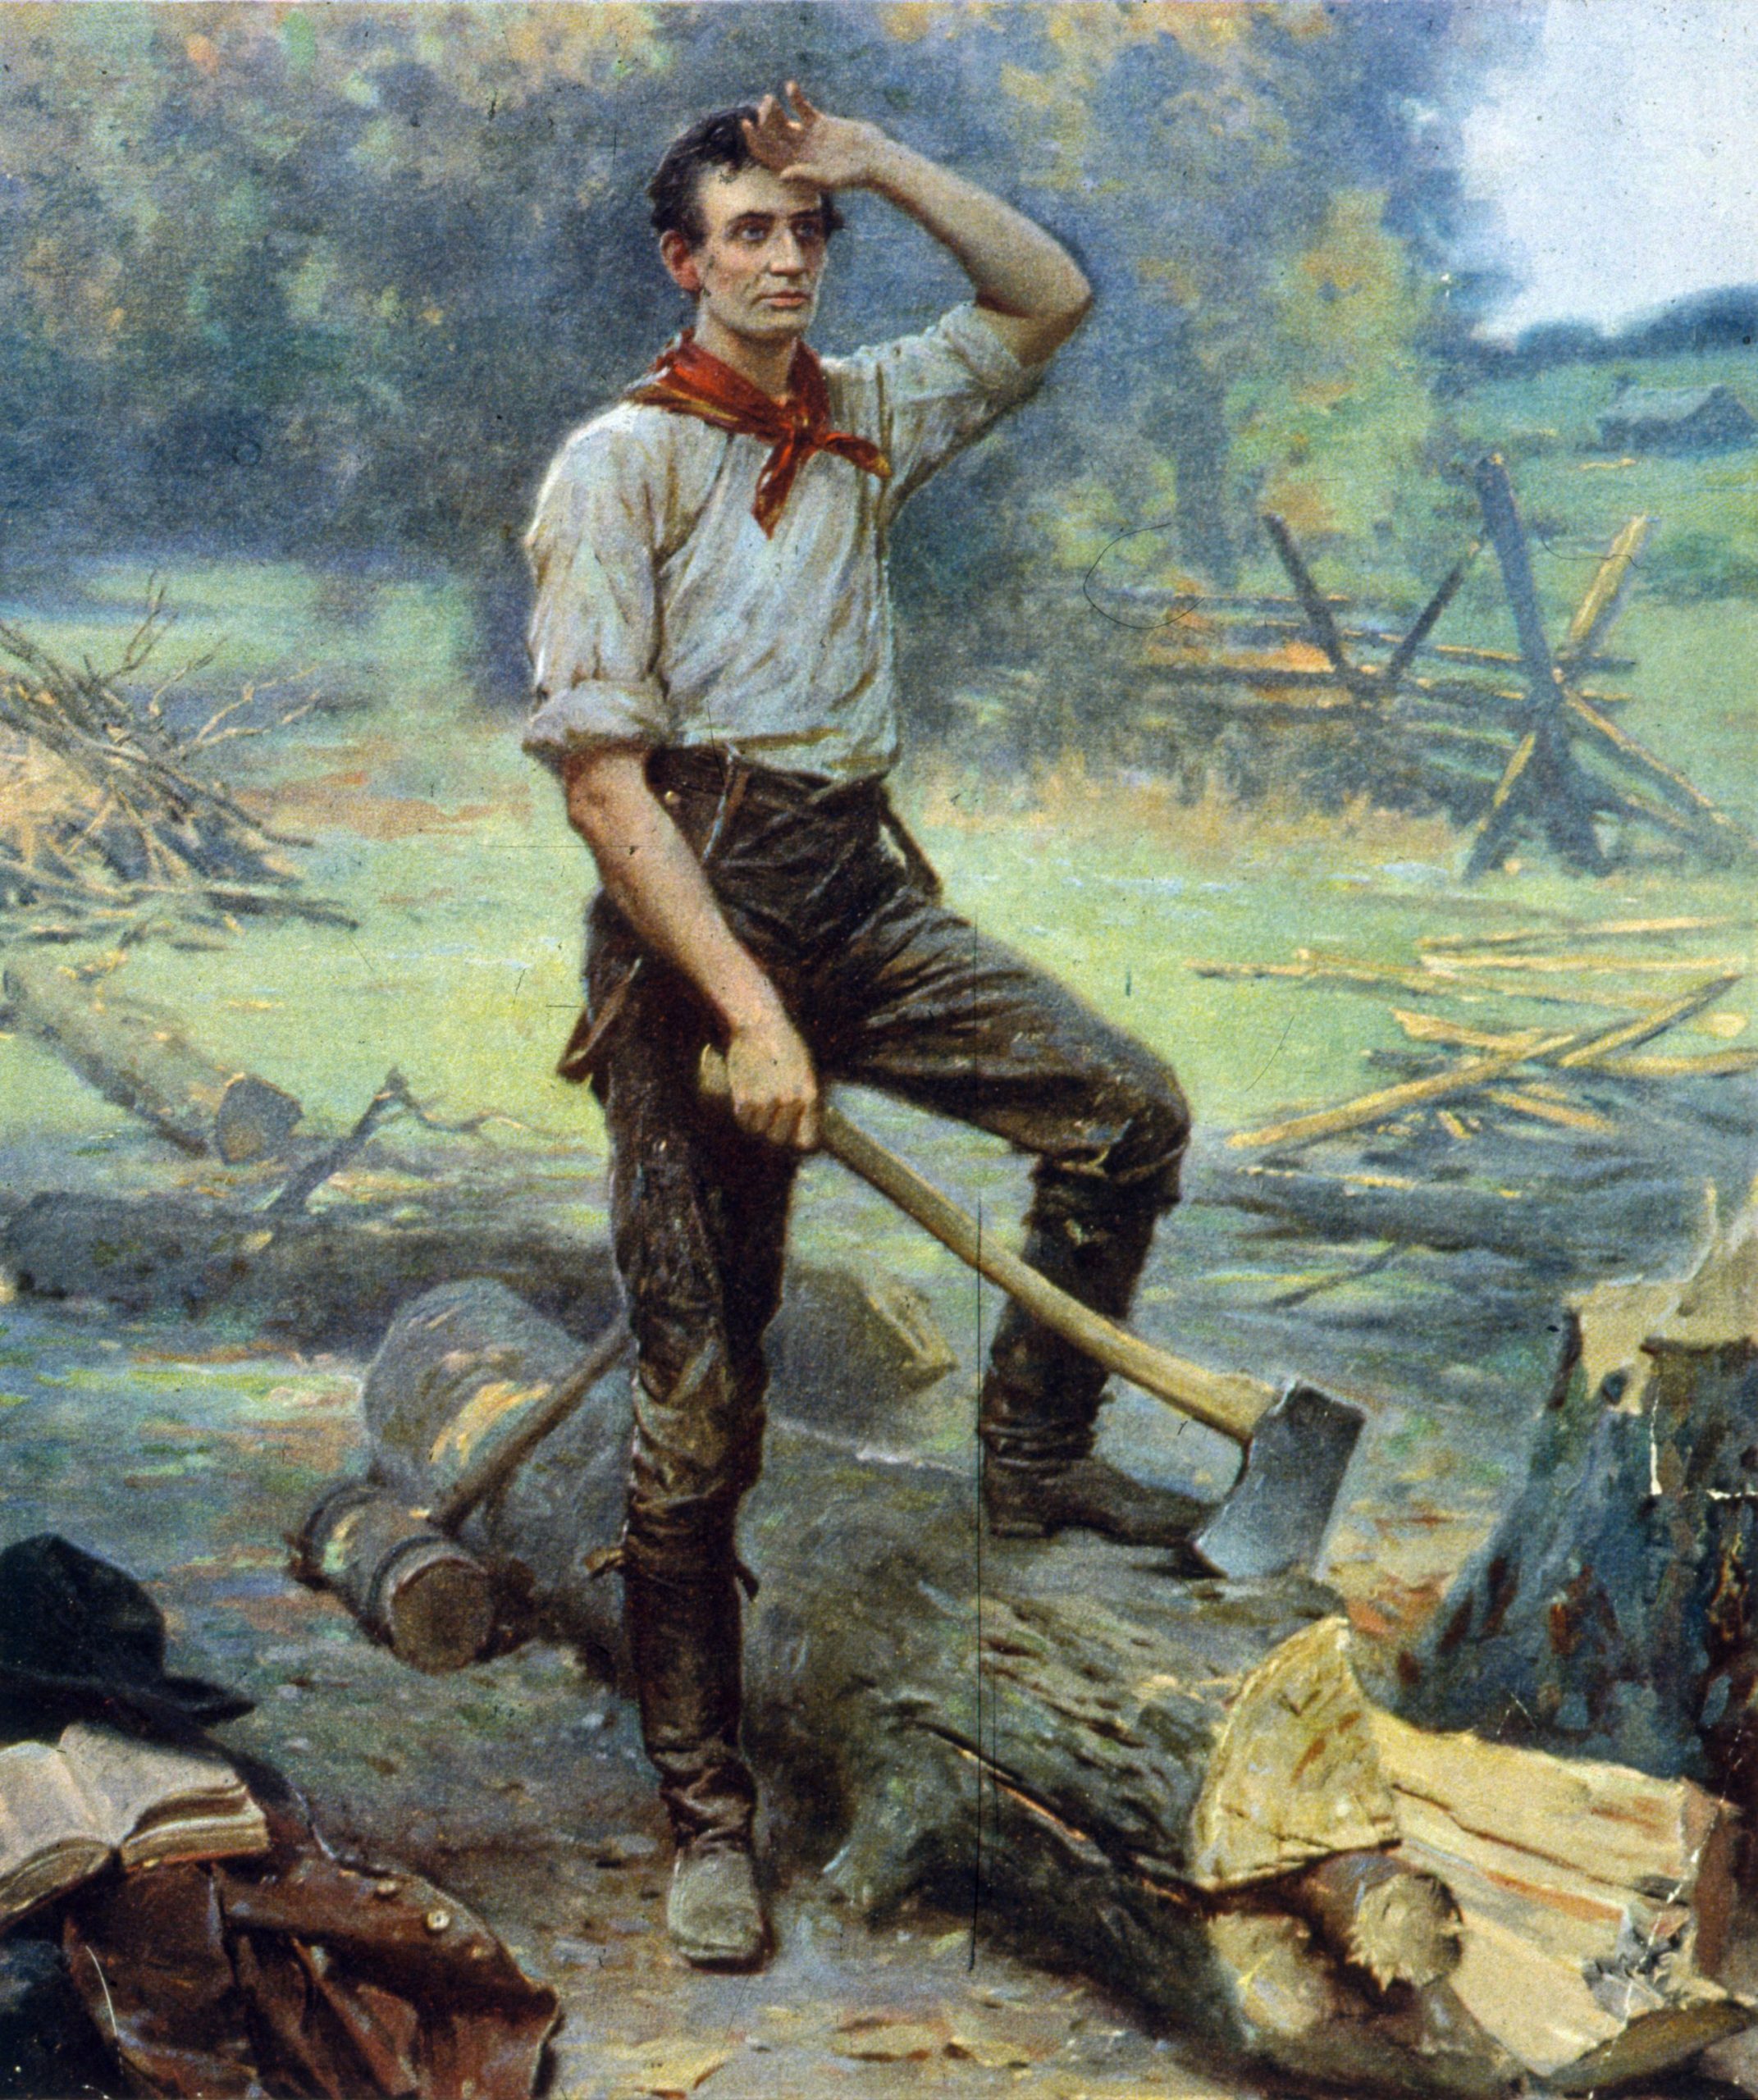 Abraham Lincoln at work cutting logs